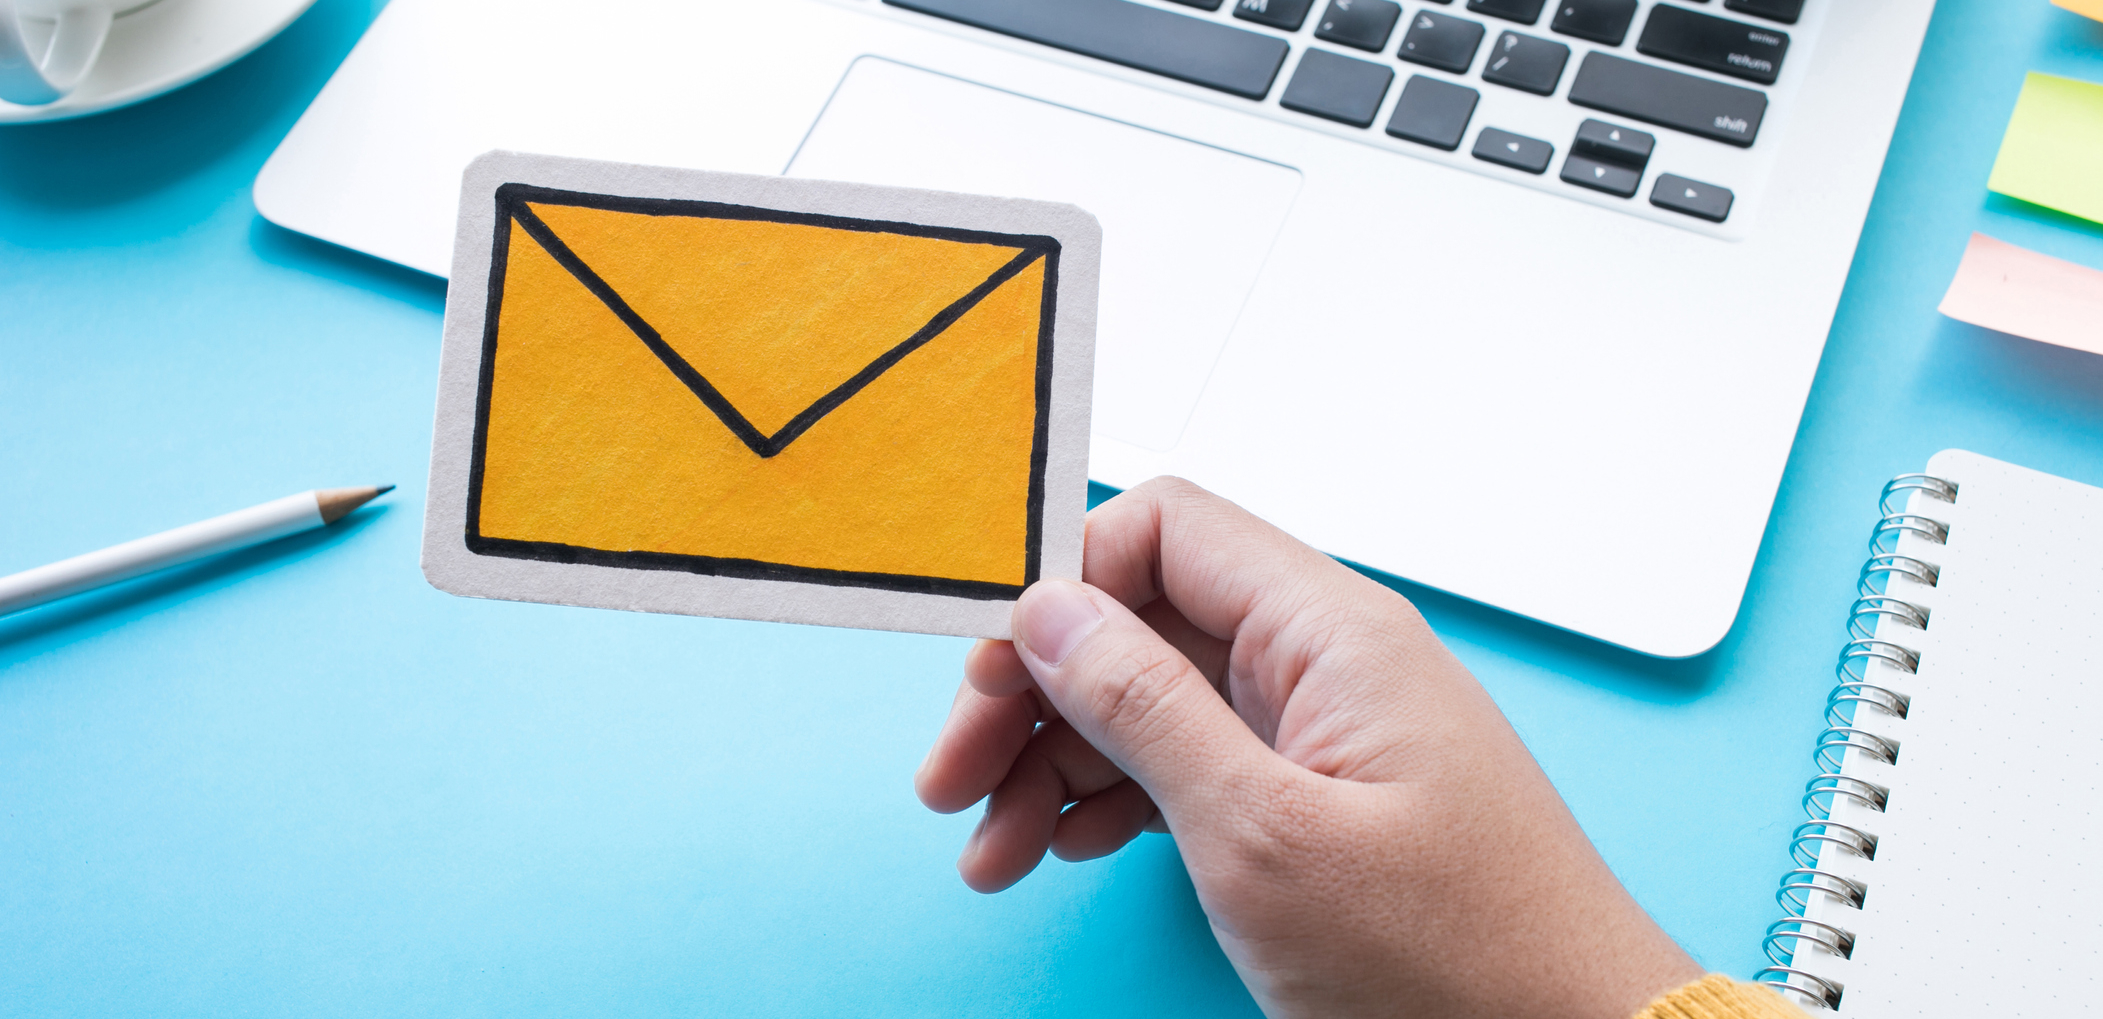 7 email marketing best practices in 2020 Featured Image